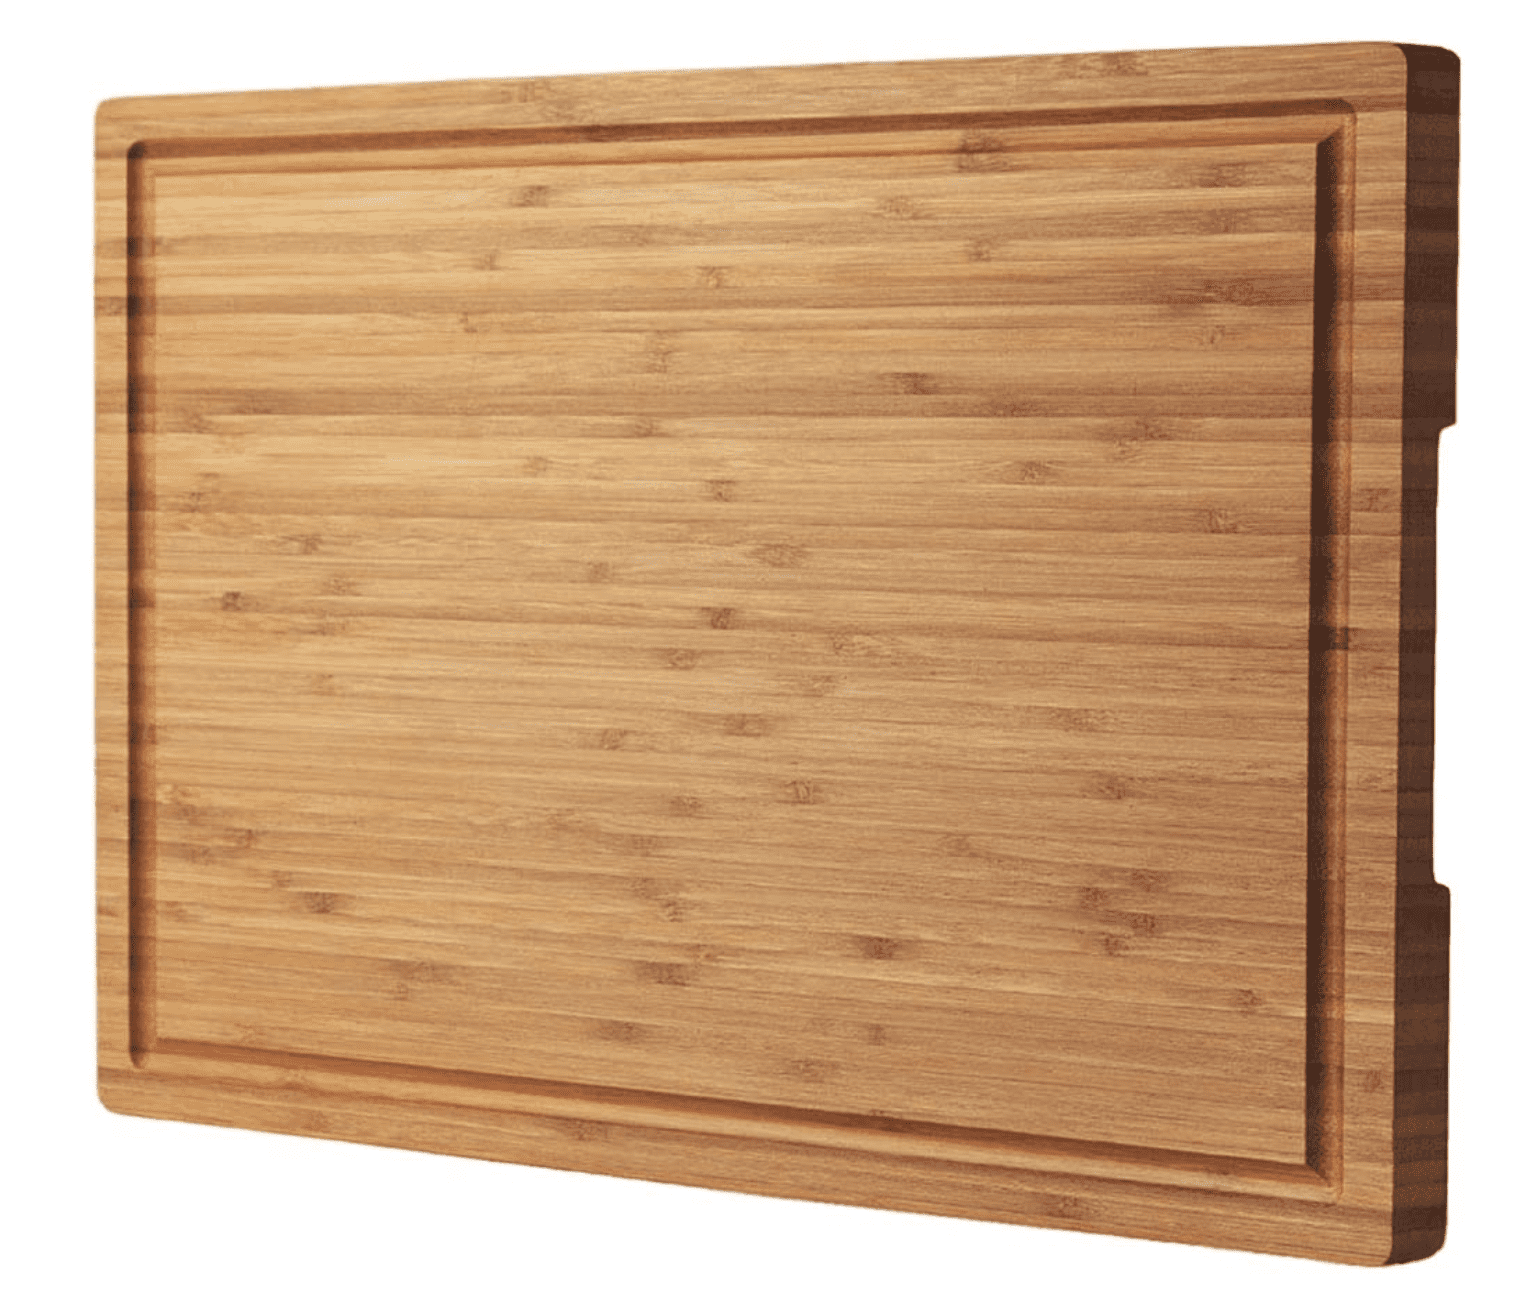 Bamboo Wooden Cutting Boards - 3 Assorted Sizes Online